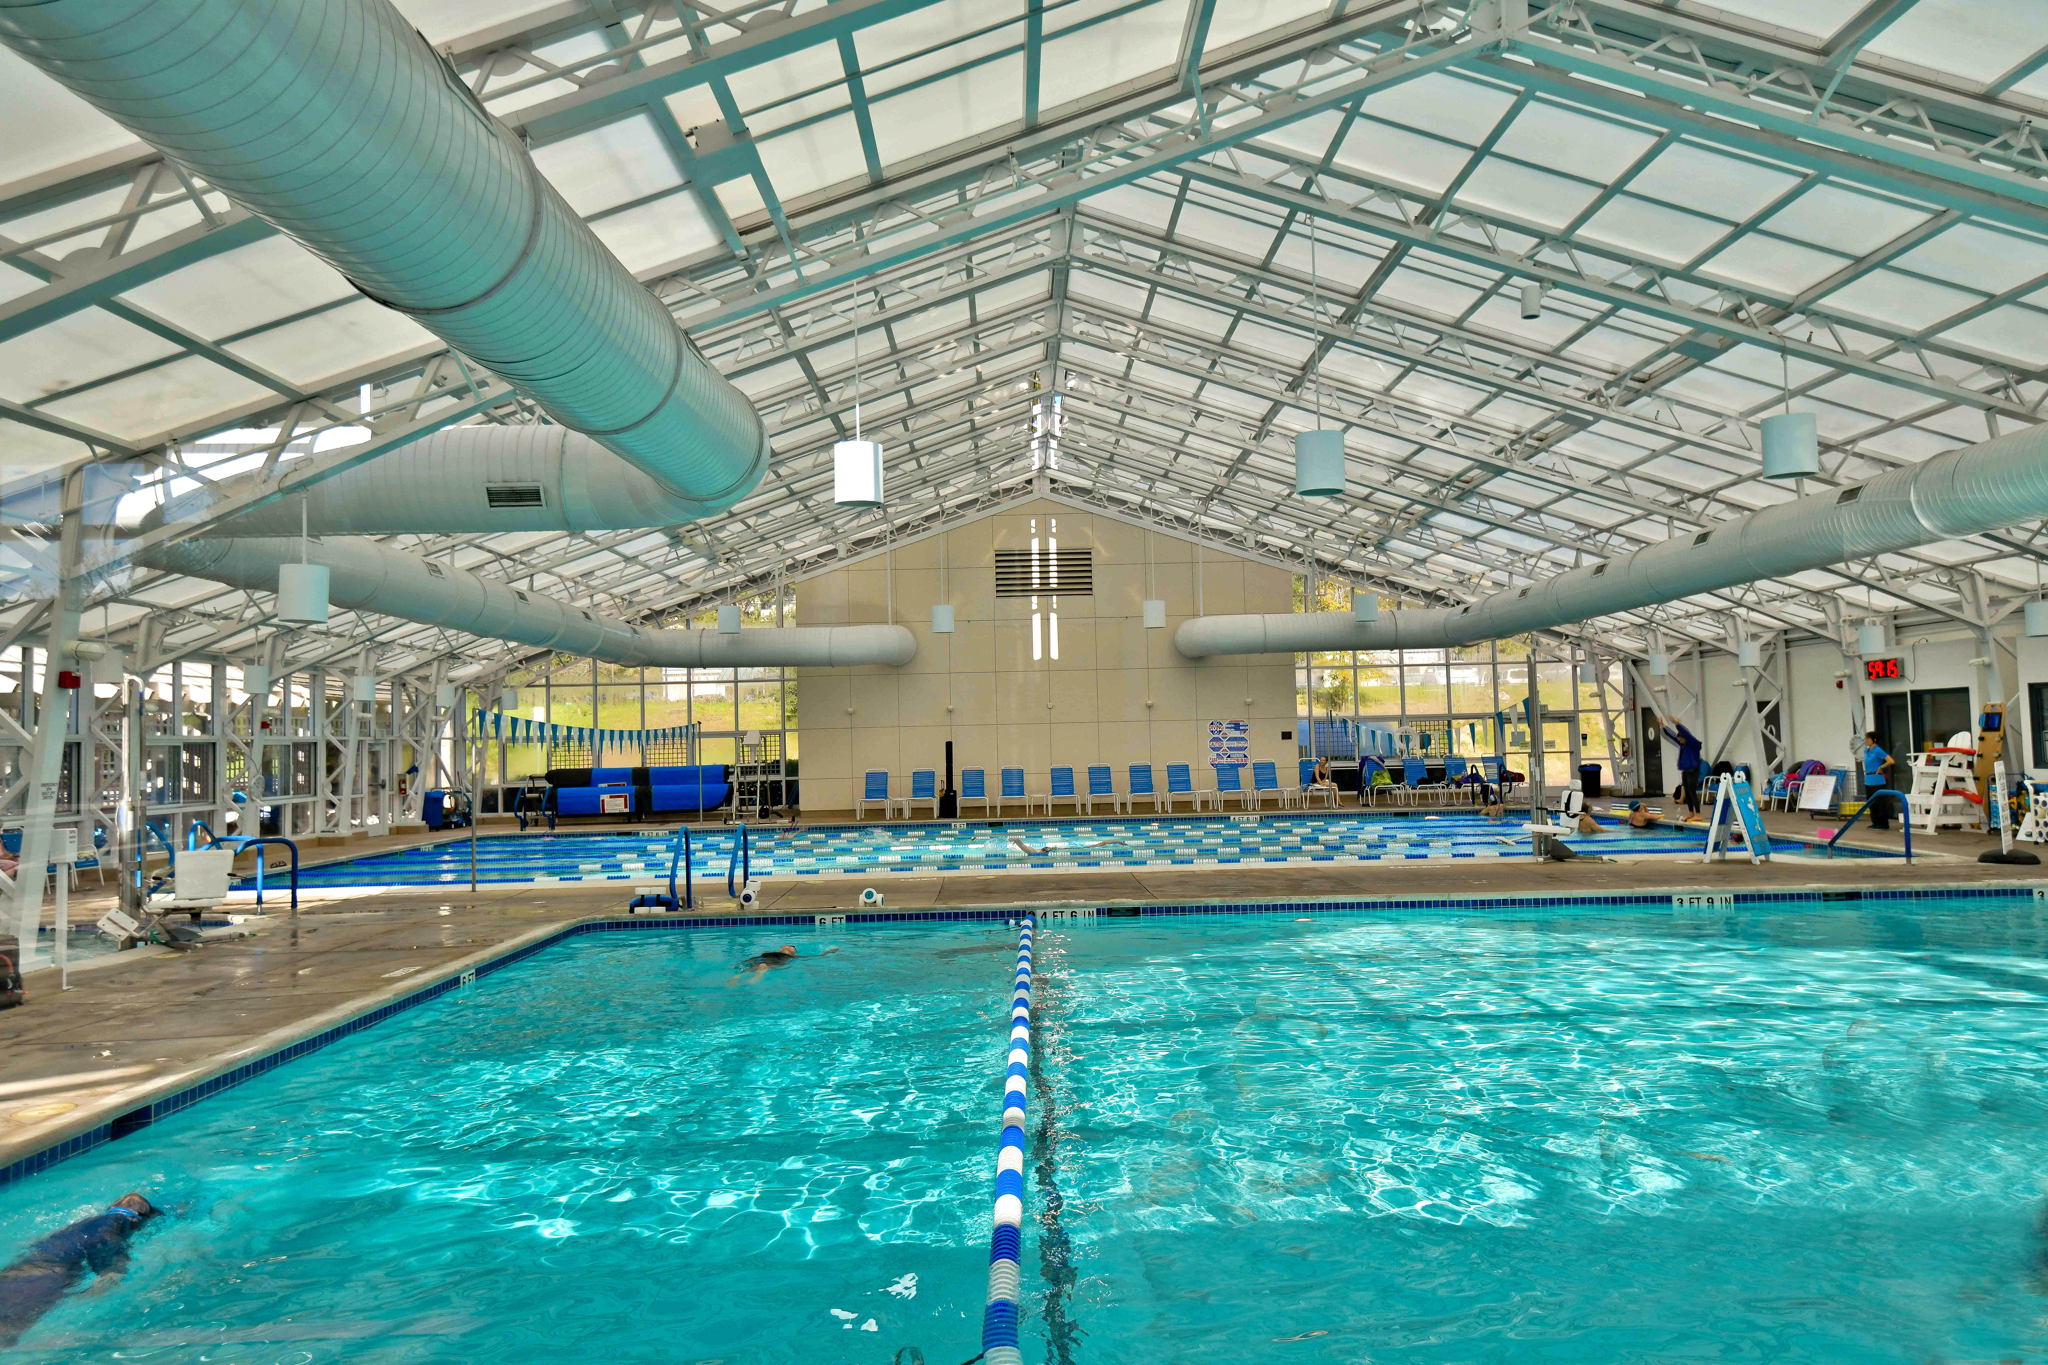 Pool at Tice Creek Fitness Center